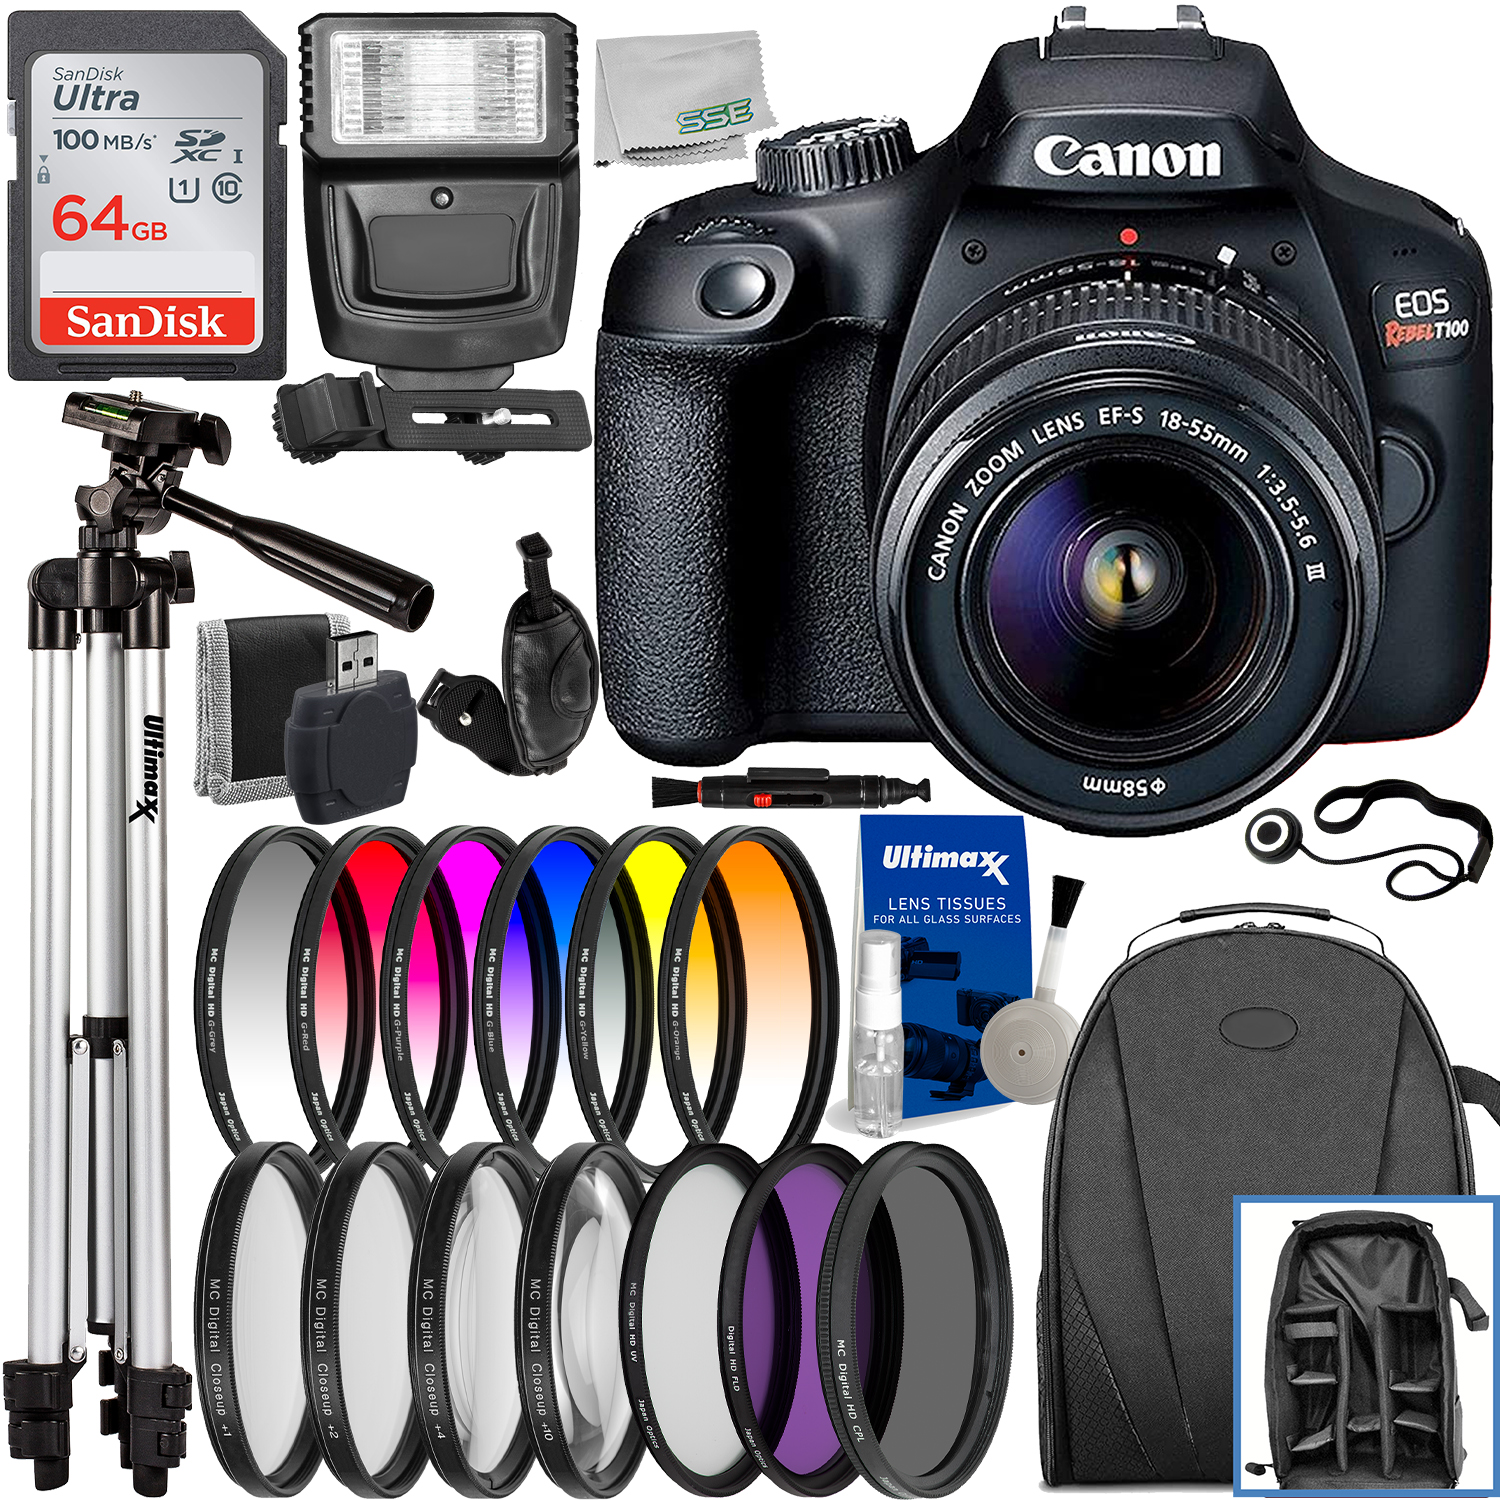 Canon EOS Rebel T100 DSLR Camera with EF-S 18-55mm f/3.5-5.6 DC III Lens & Deluxe Accessory Bundle - Includes: SanDisk Ultra 64GB Memory Card, Water Resistant Backpack, Digital Slave Flash & Much More